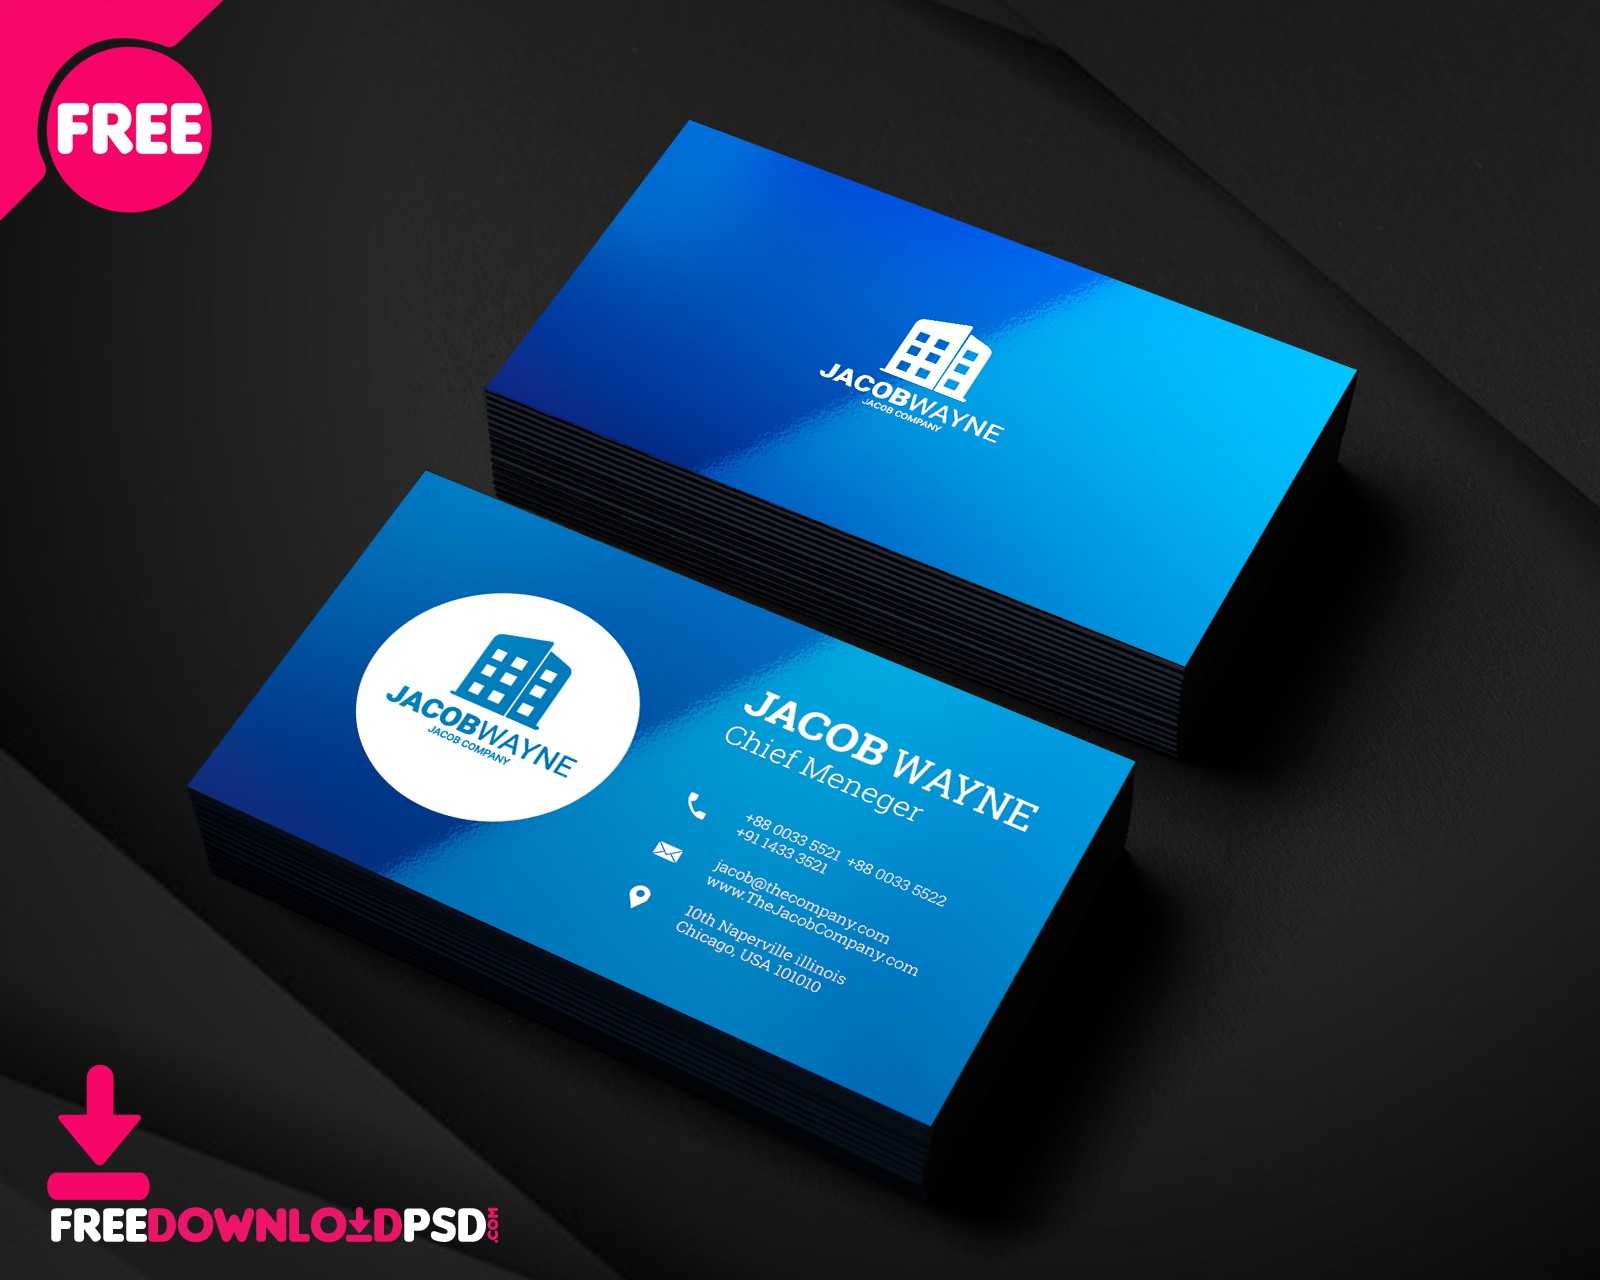 Real Estate Business Card Psd | Freedownloadpsd Inside Business Card Template Photoshop Cs6